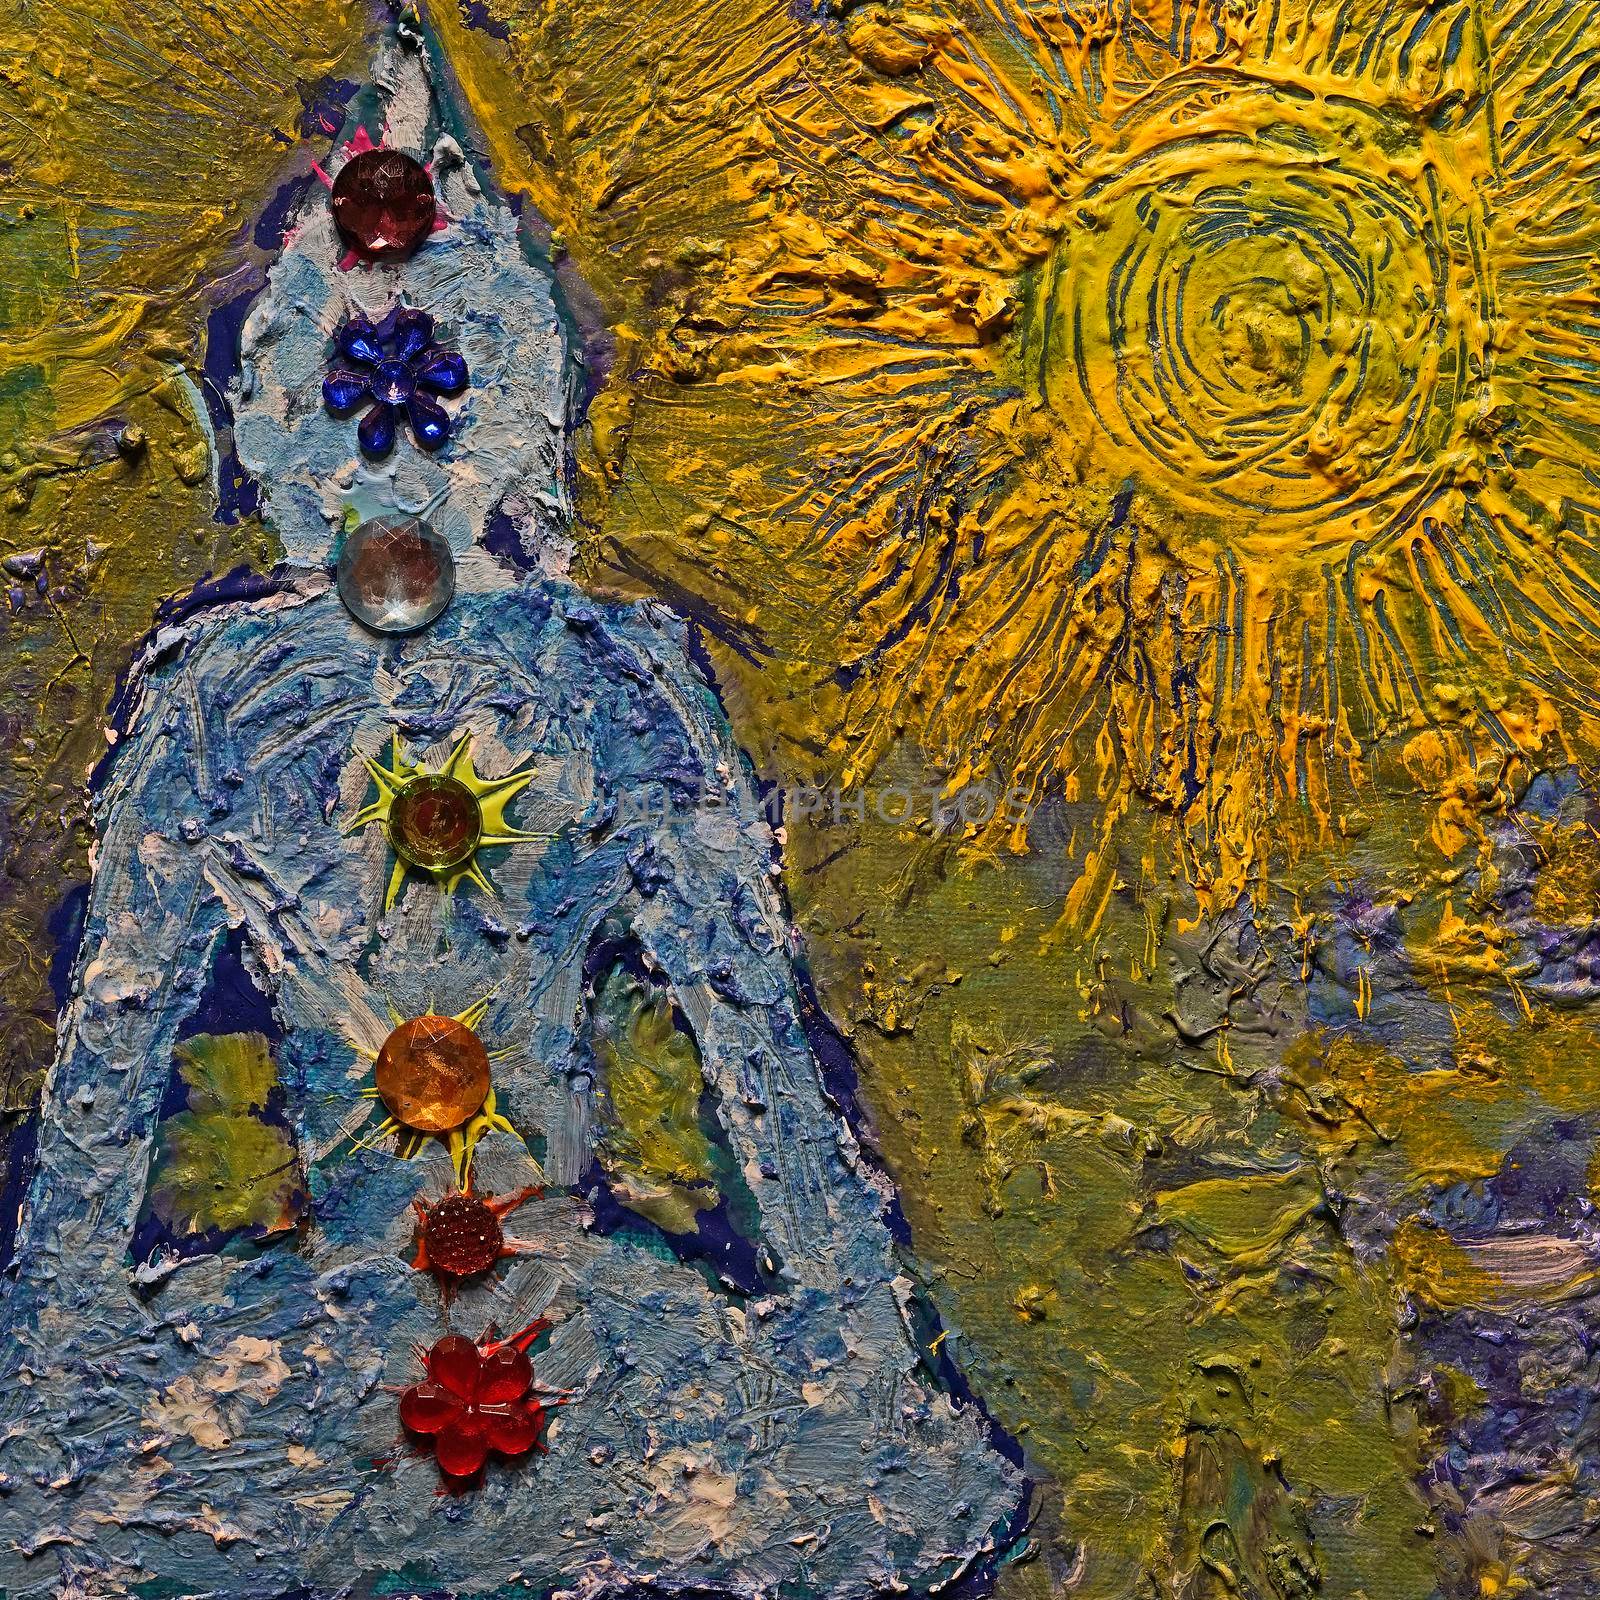 Buddha in the sun with the seven chakras. The painting is made with roughly applied acrylic paint. Colored acrylic stones were used for the chakras